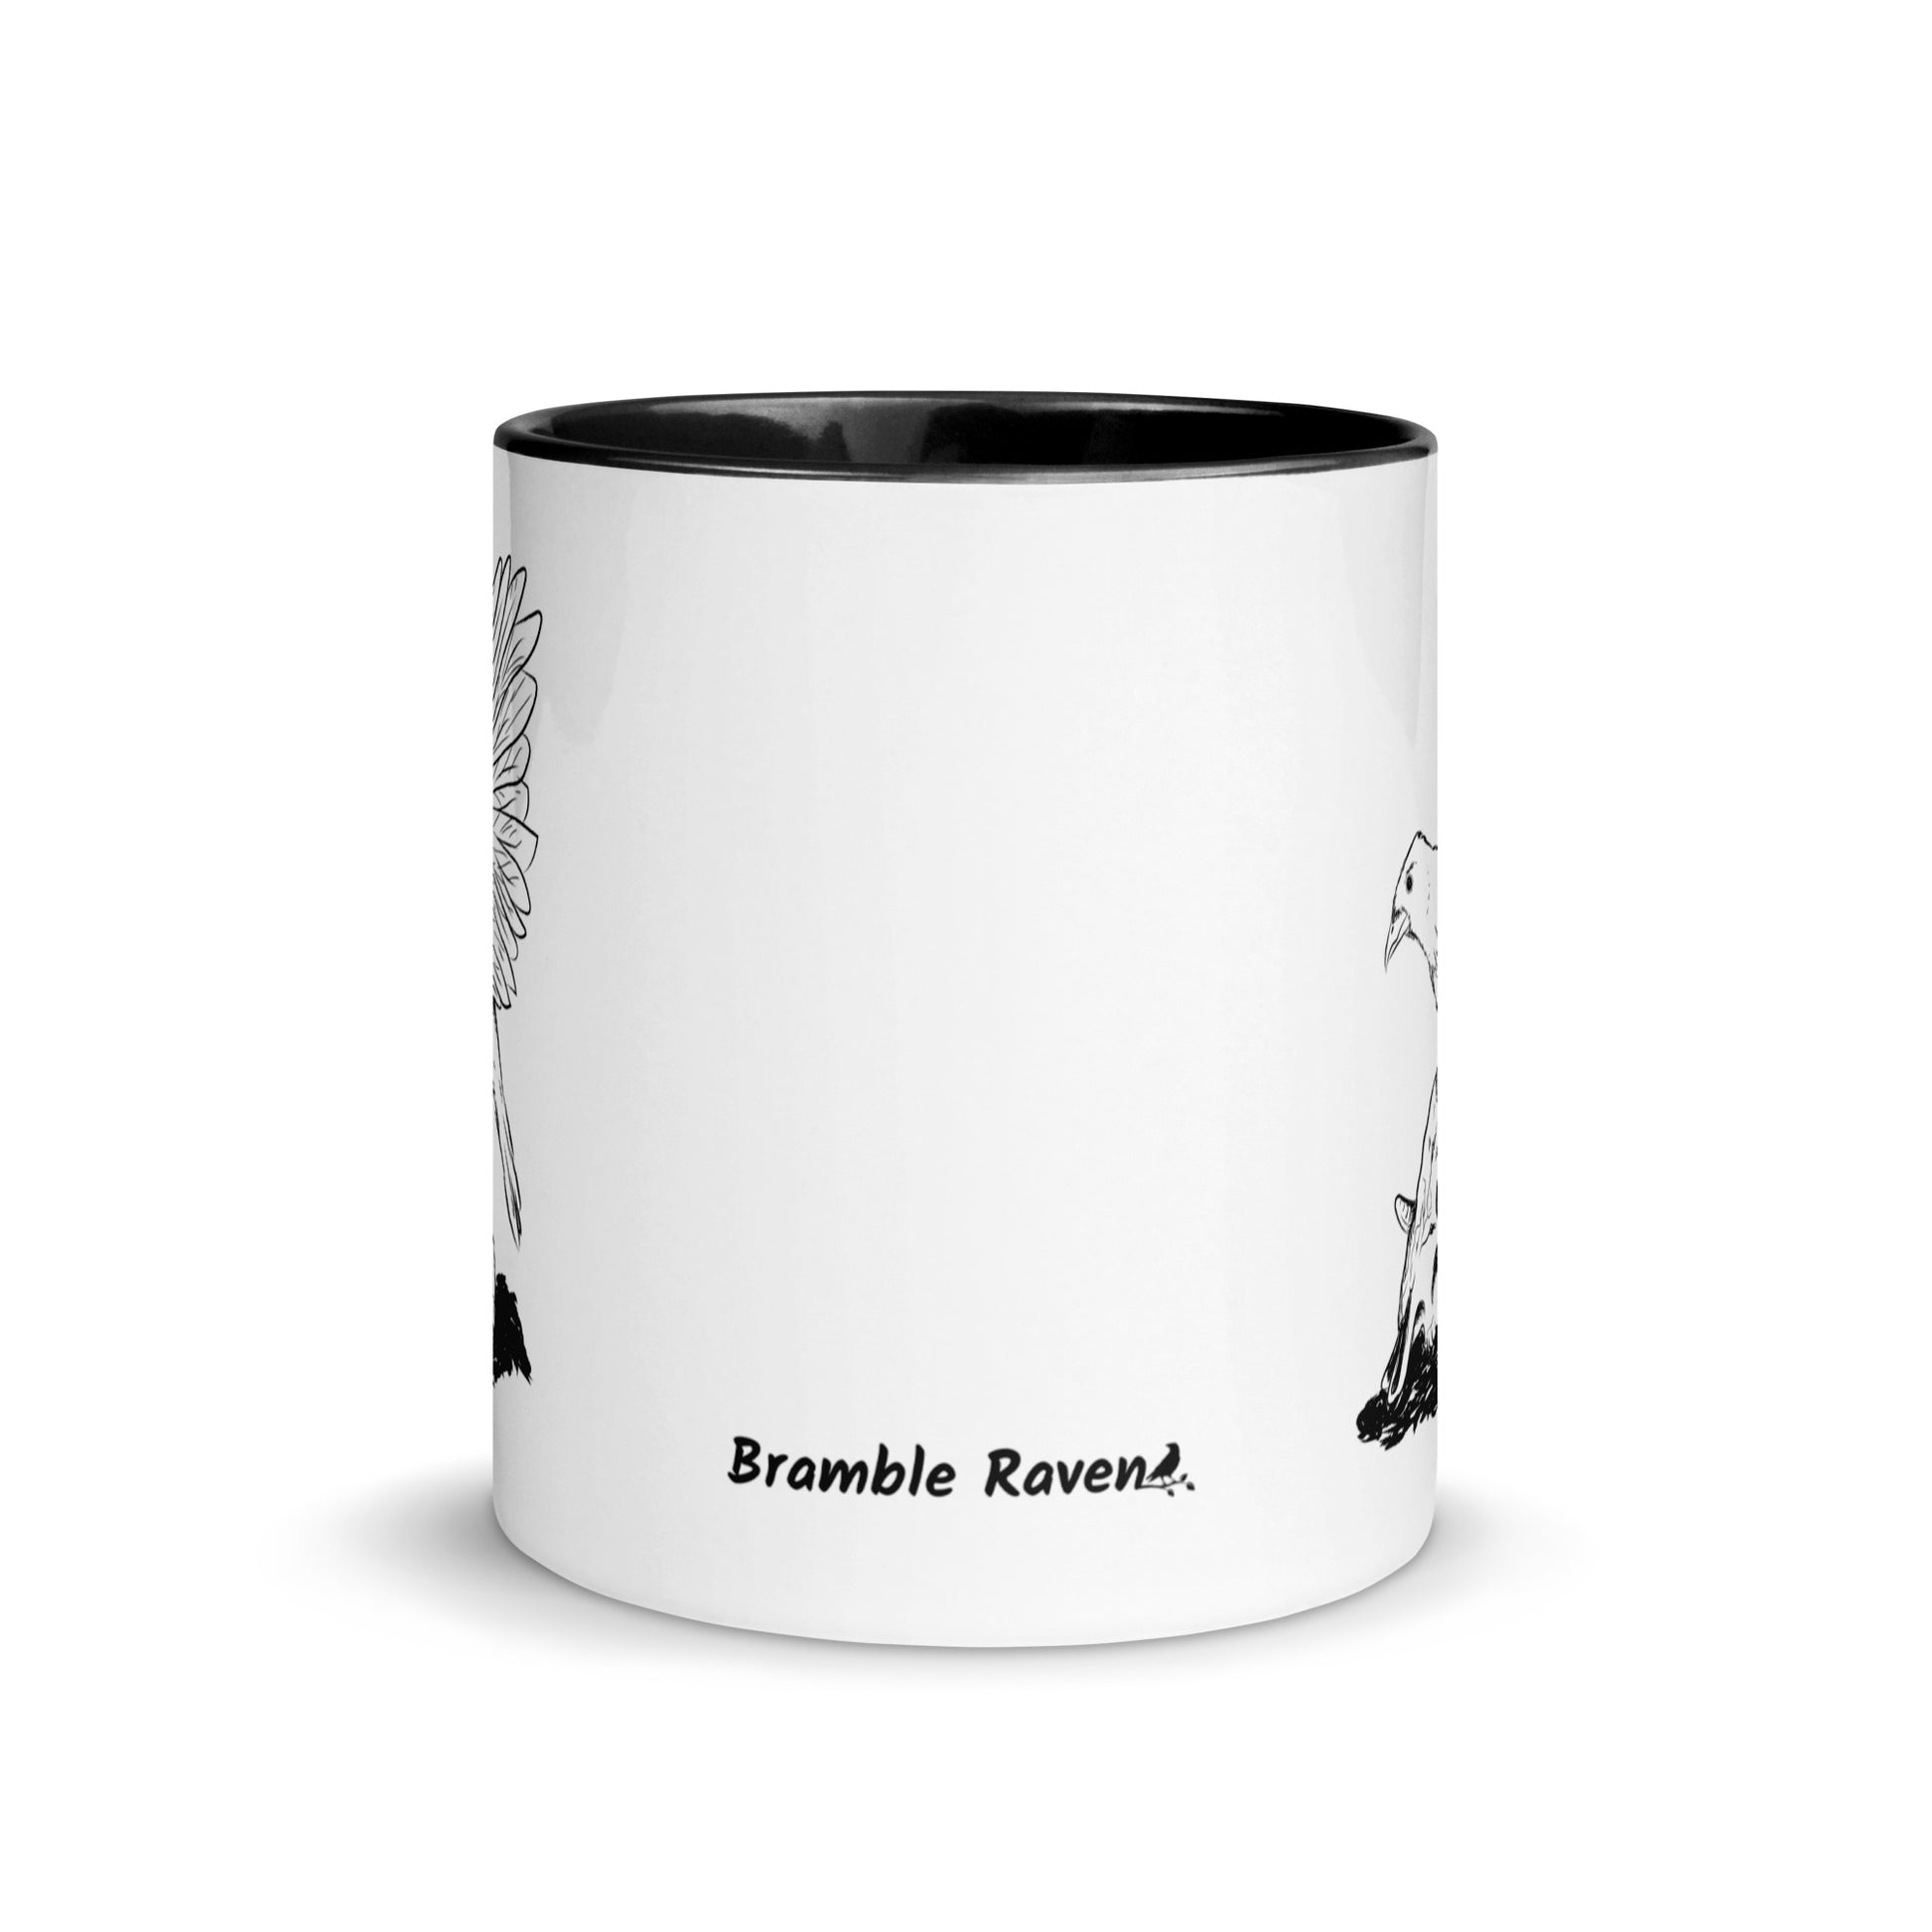 11 ounce white ceramic mug with black handle and inside. Features a double sided print of Reflections, a design with a crow sitting on a sheep skull. Dishwasher and microwave safe. Front view.